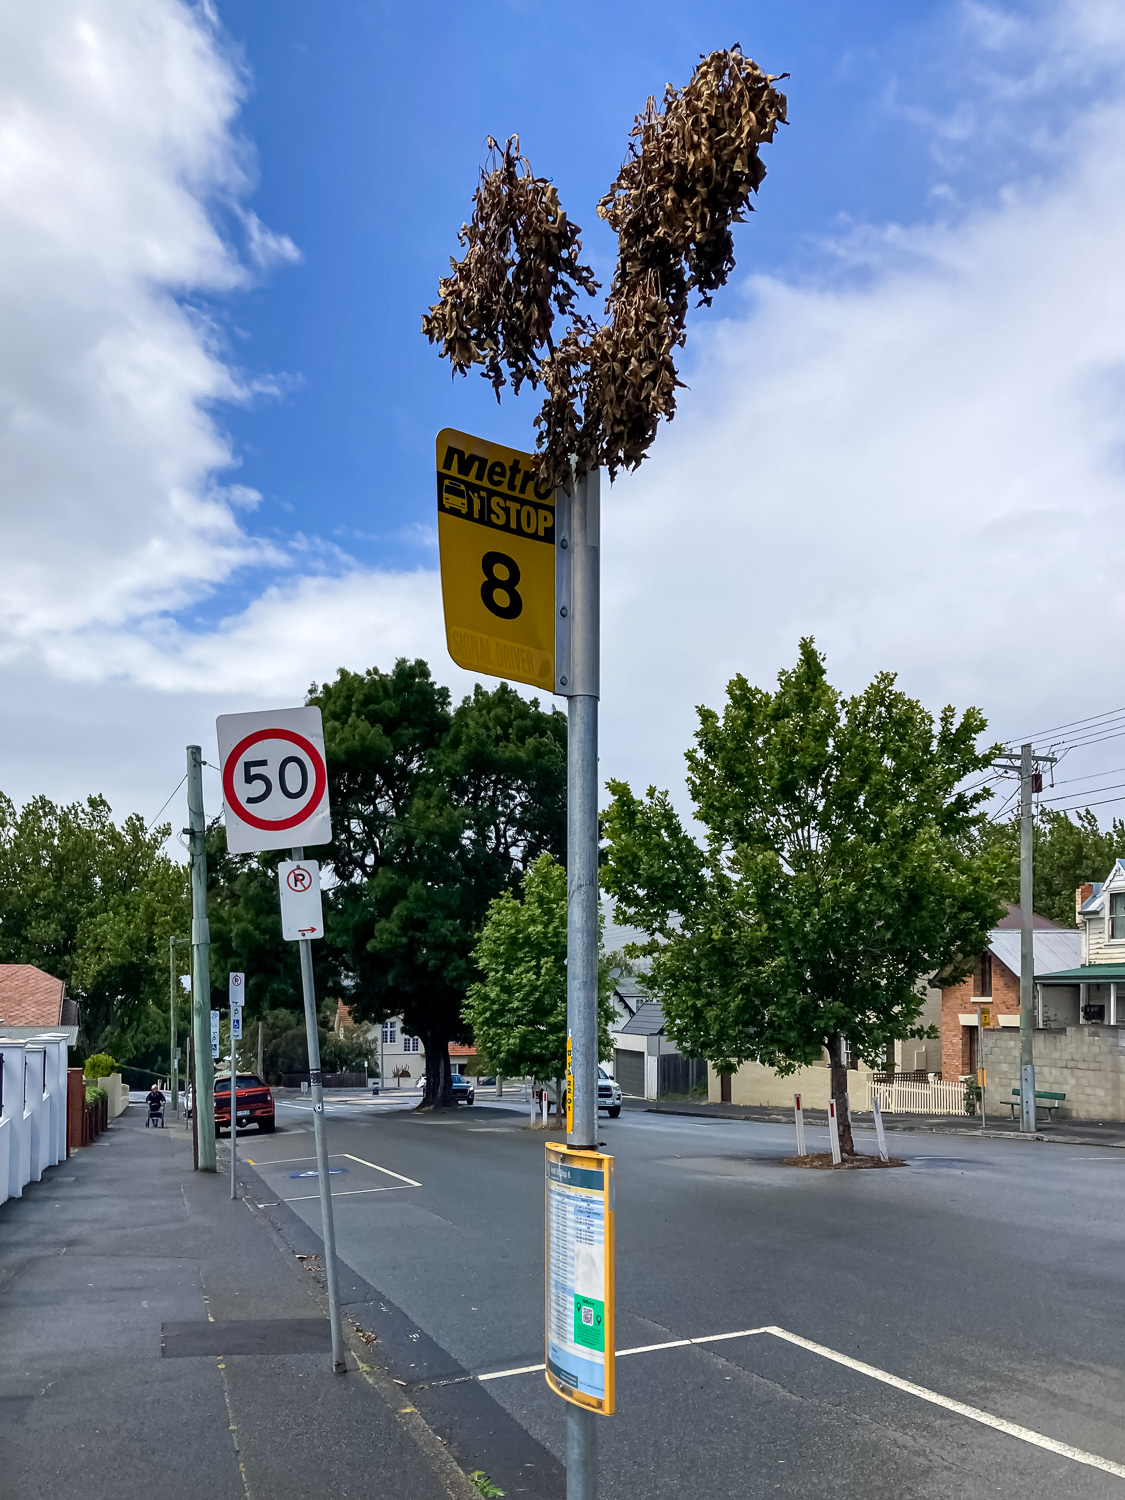 Some leafy branches stuck into the top of a bus stop pole